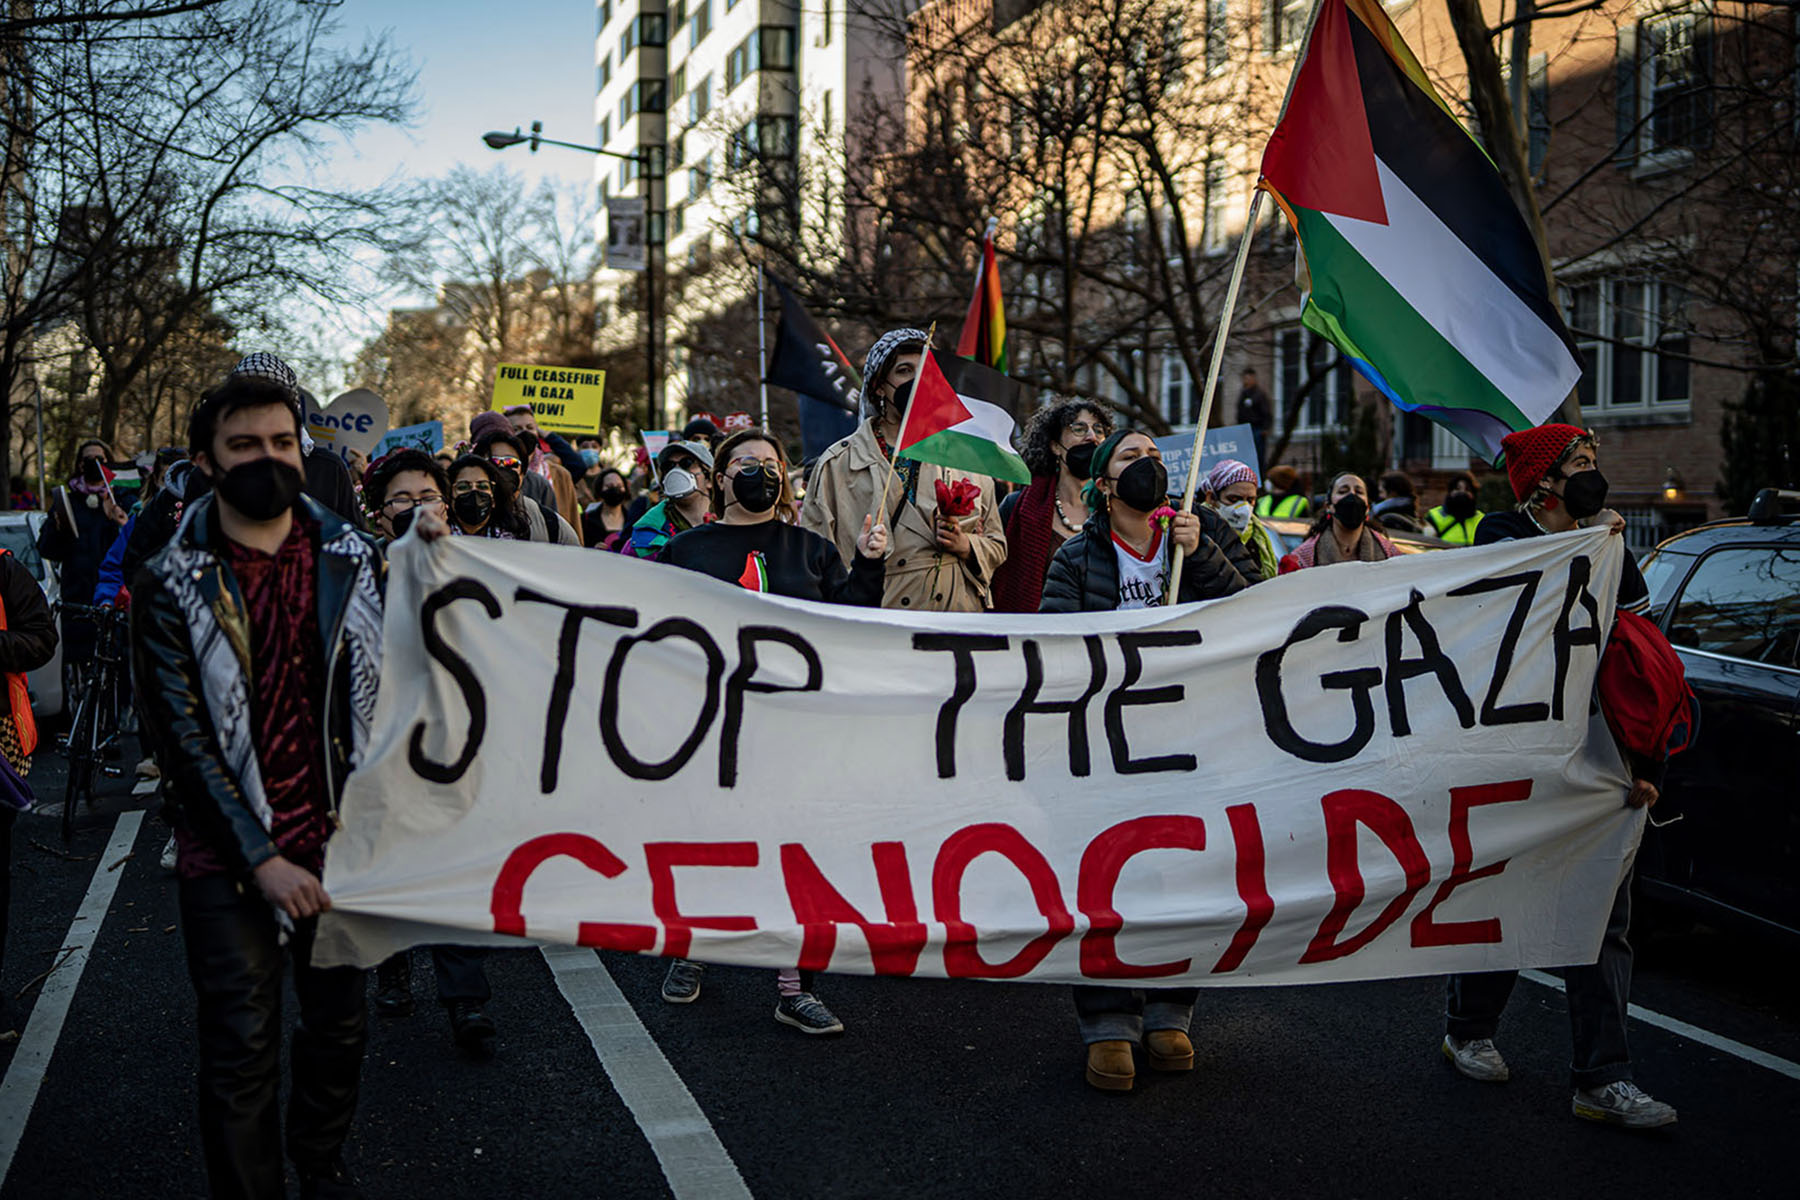 Protesters hold a banner that read "Stop the Gaza Genicide" as they march in Washington, D.C.